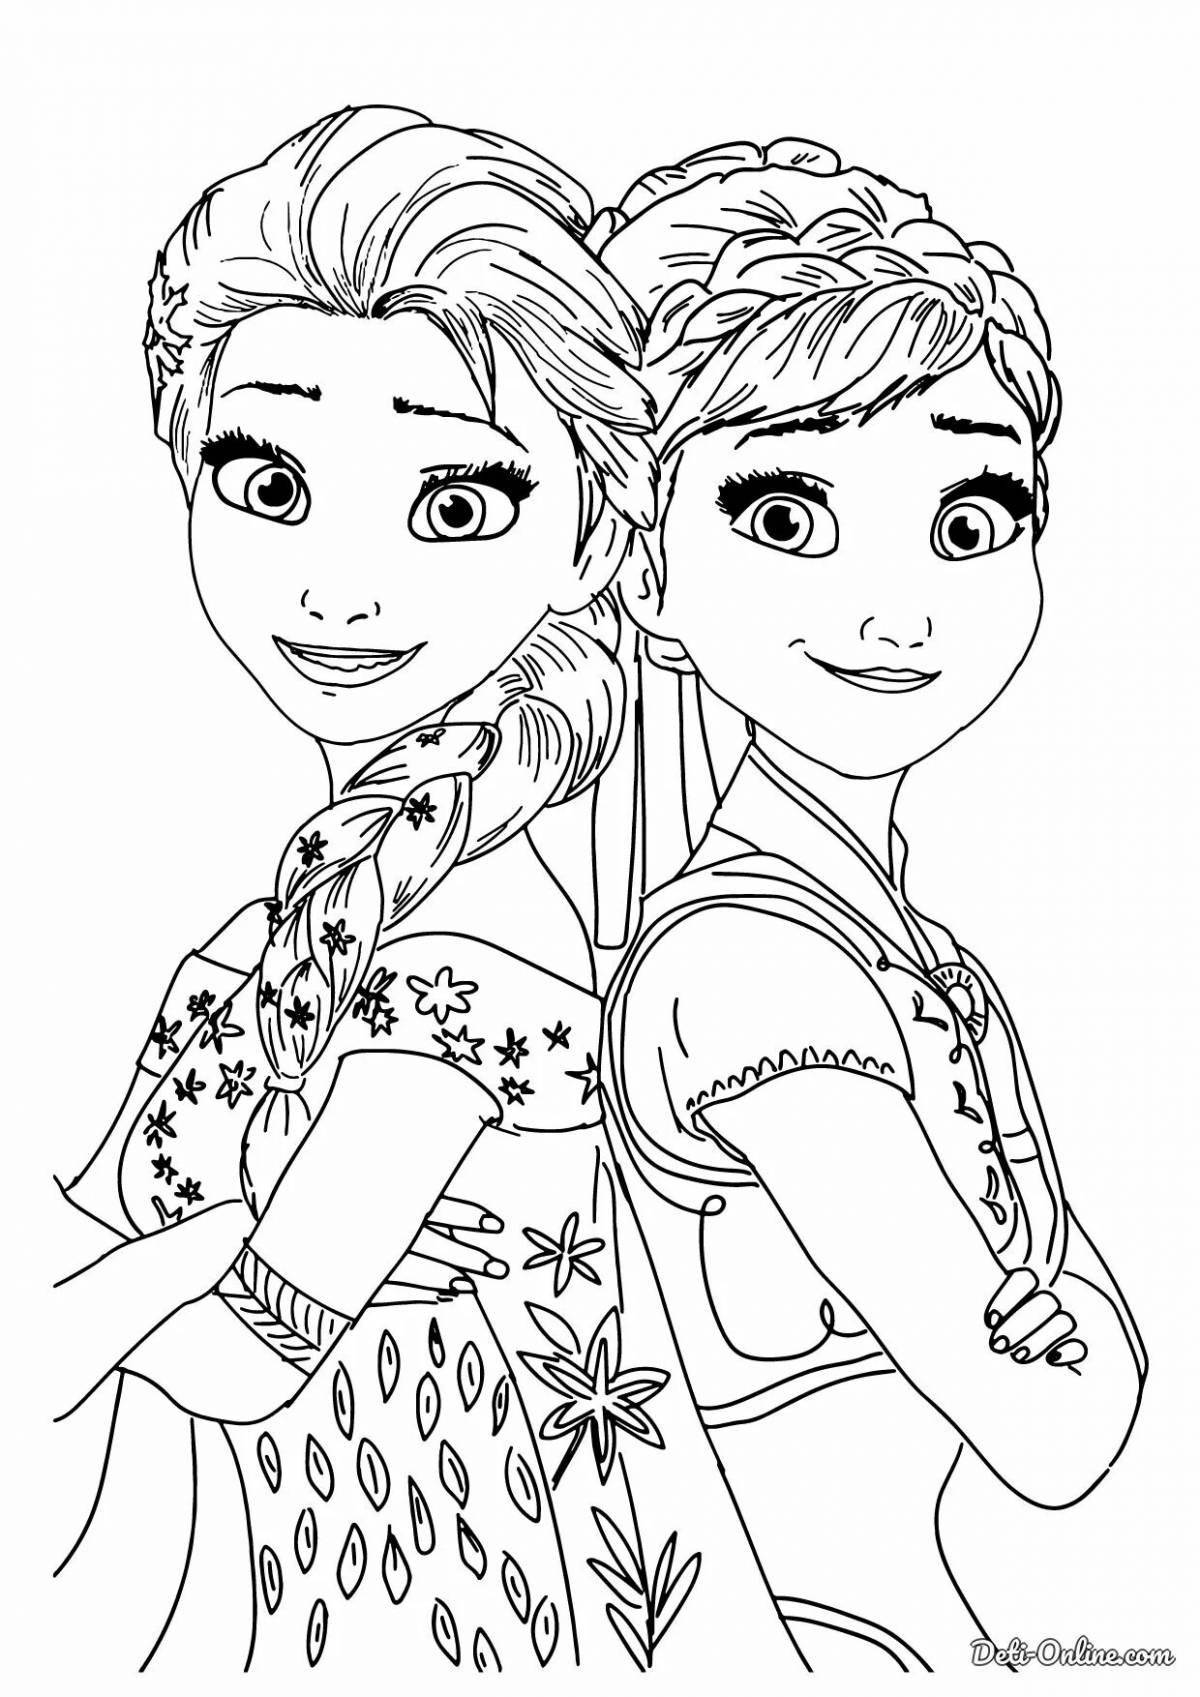 Exalted coloring pages for girls anna